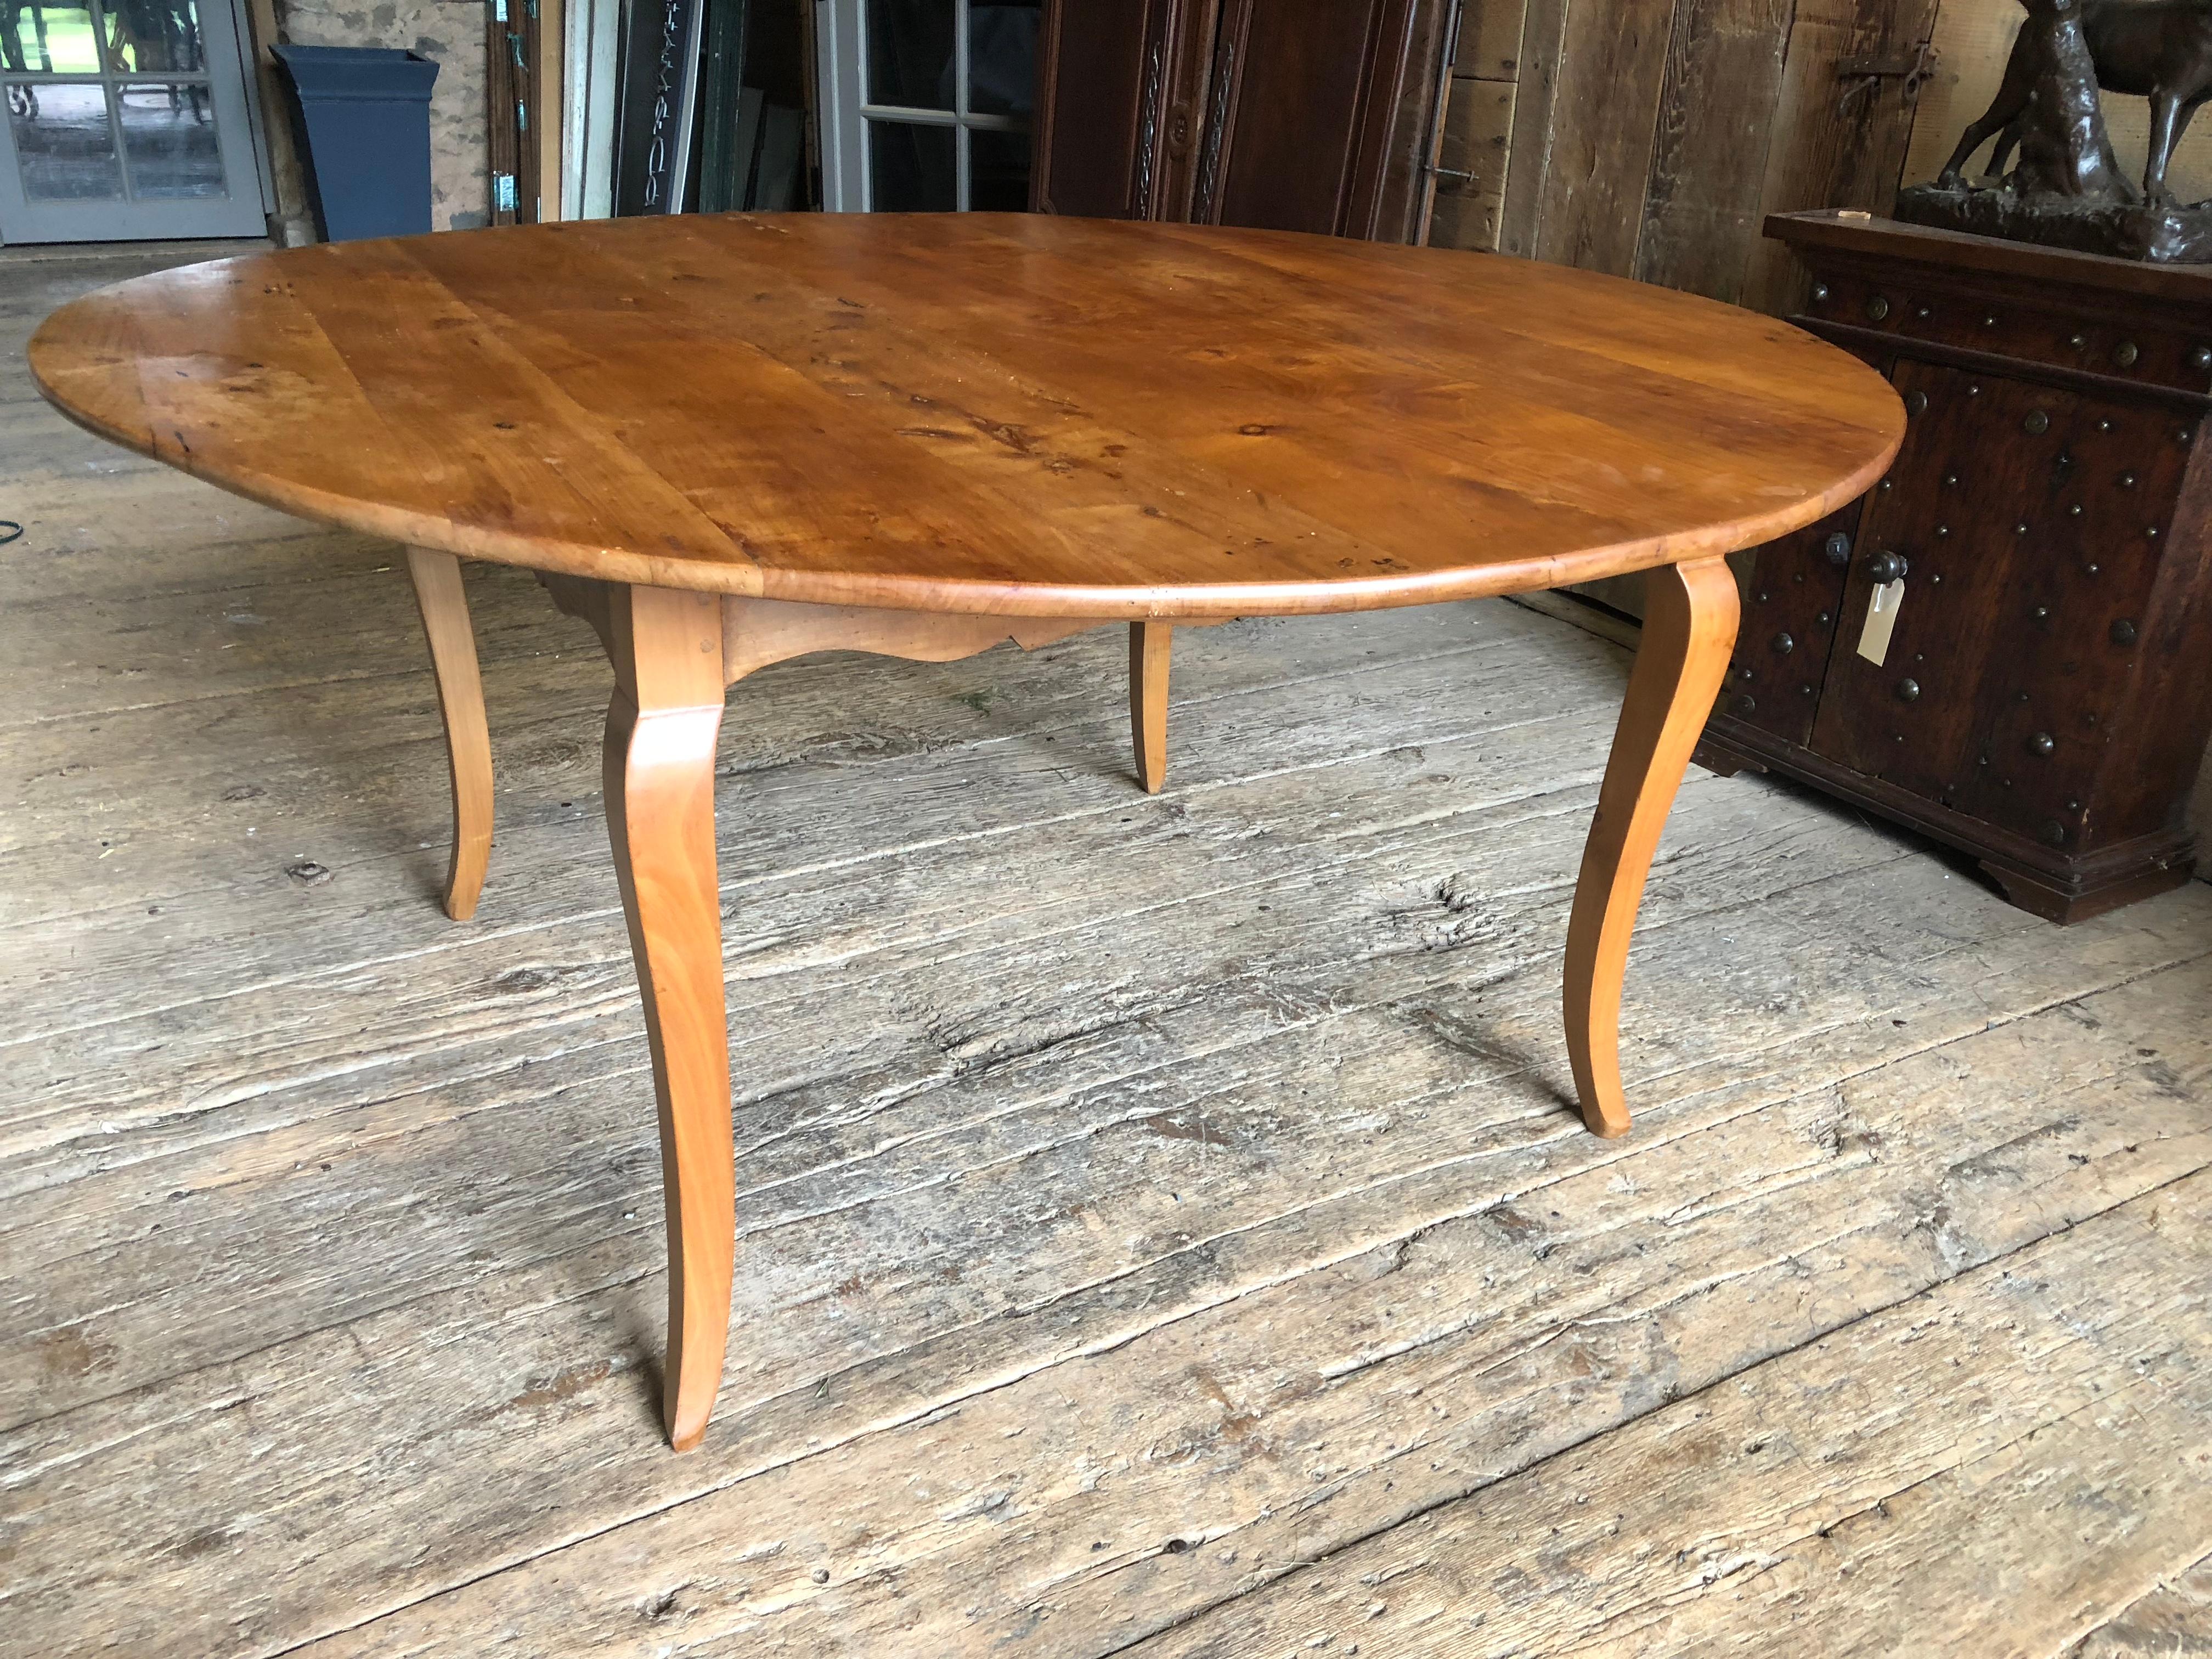 A large round French farm table in cherrywood with Louis XV style cabriole legs and scalloped apron, probably mid 19th century, refinished. Has old shipping label “Desbordes Epoche LXV”.